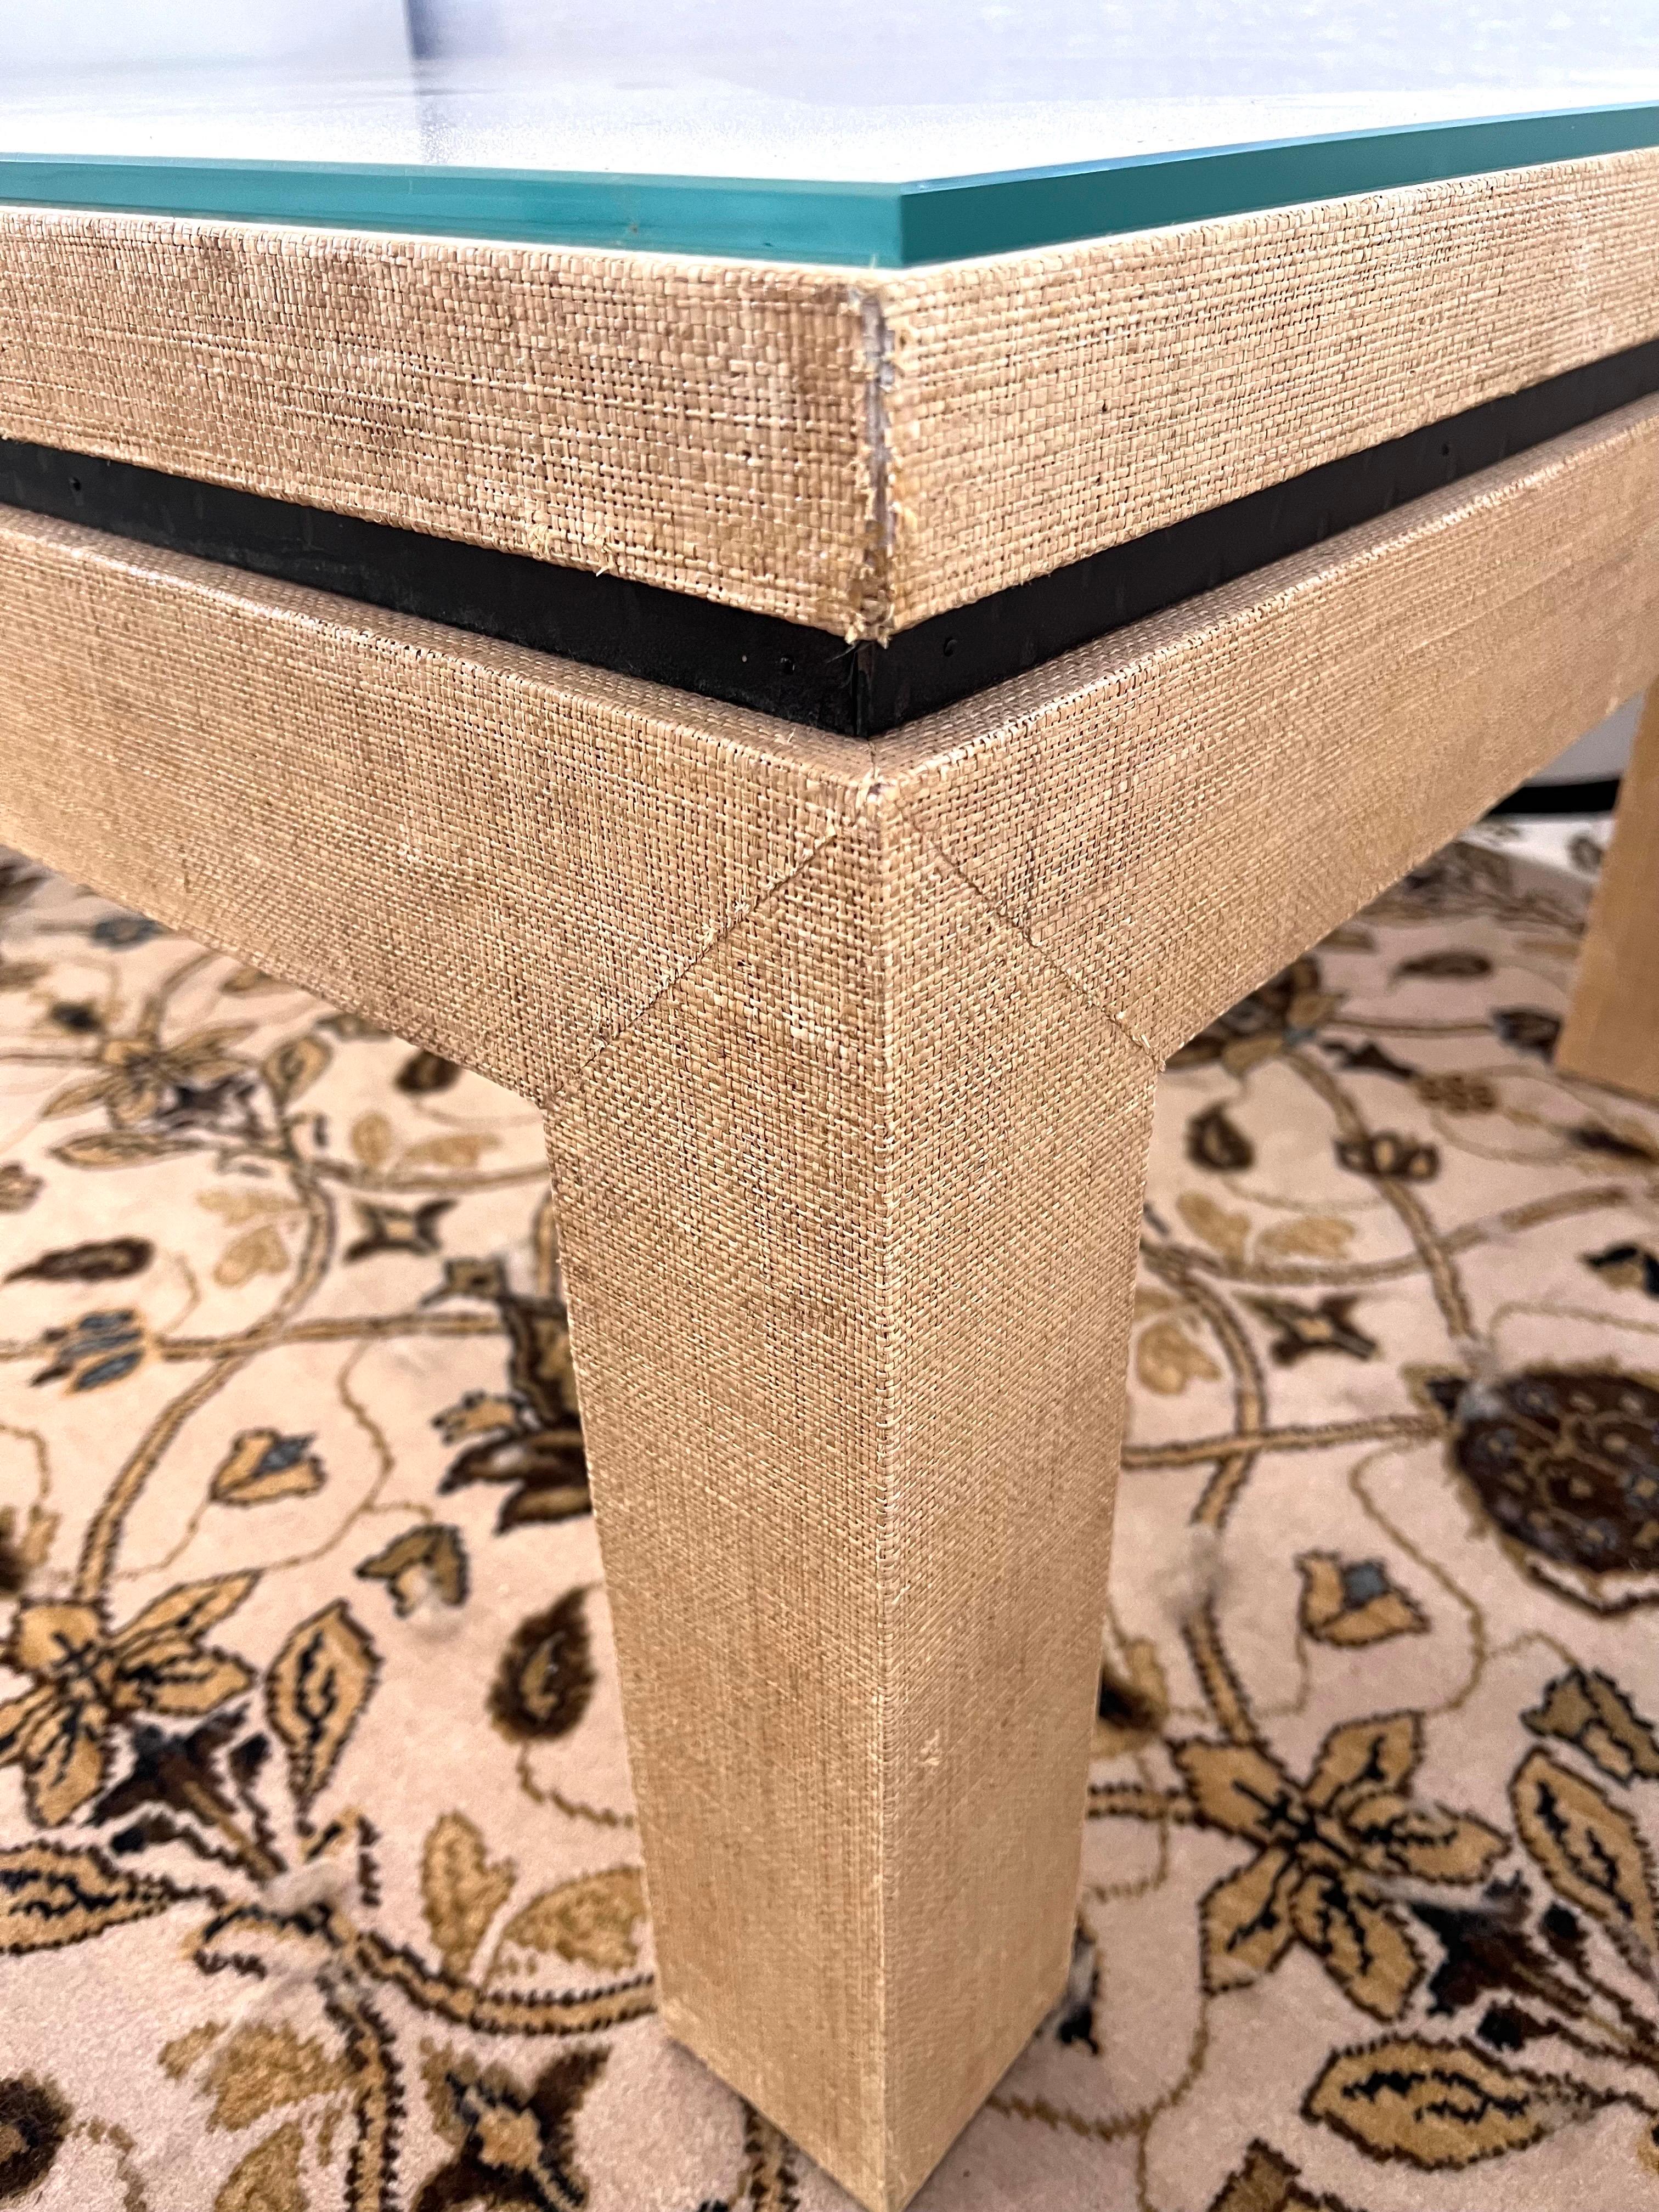 Casual yet elegant natural raffia cocktail table from designer Barclay Butera that features a decorative metal band that separates the base from the top thereby creating a floating appearance.  The corners are mitered giving the design a craftsman